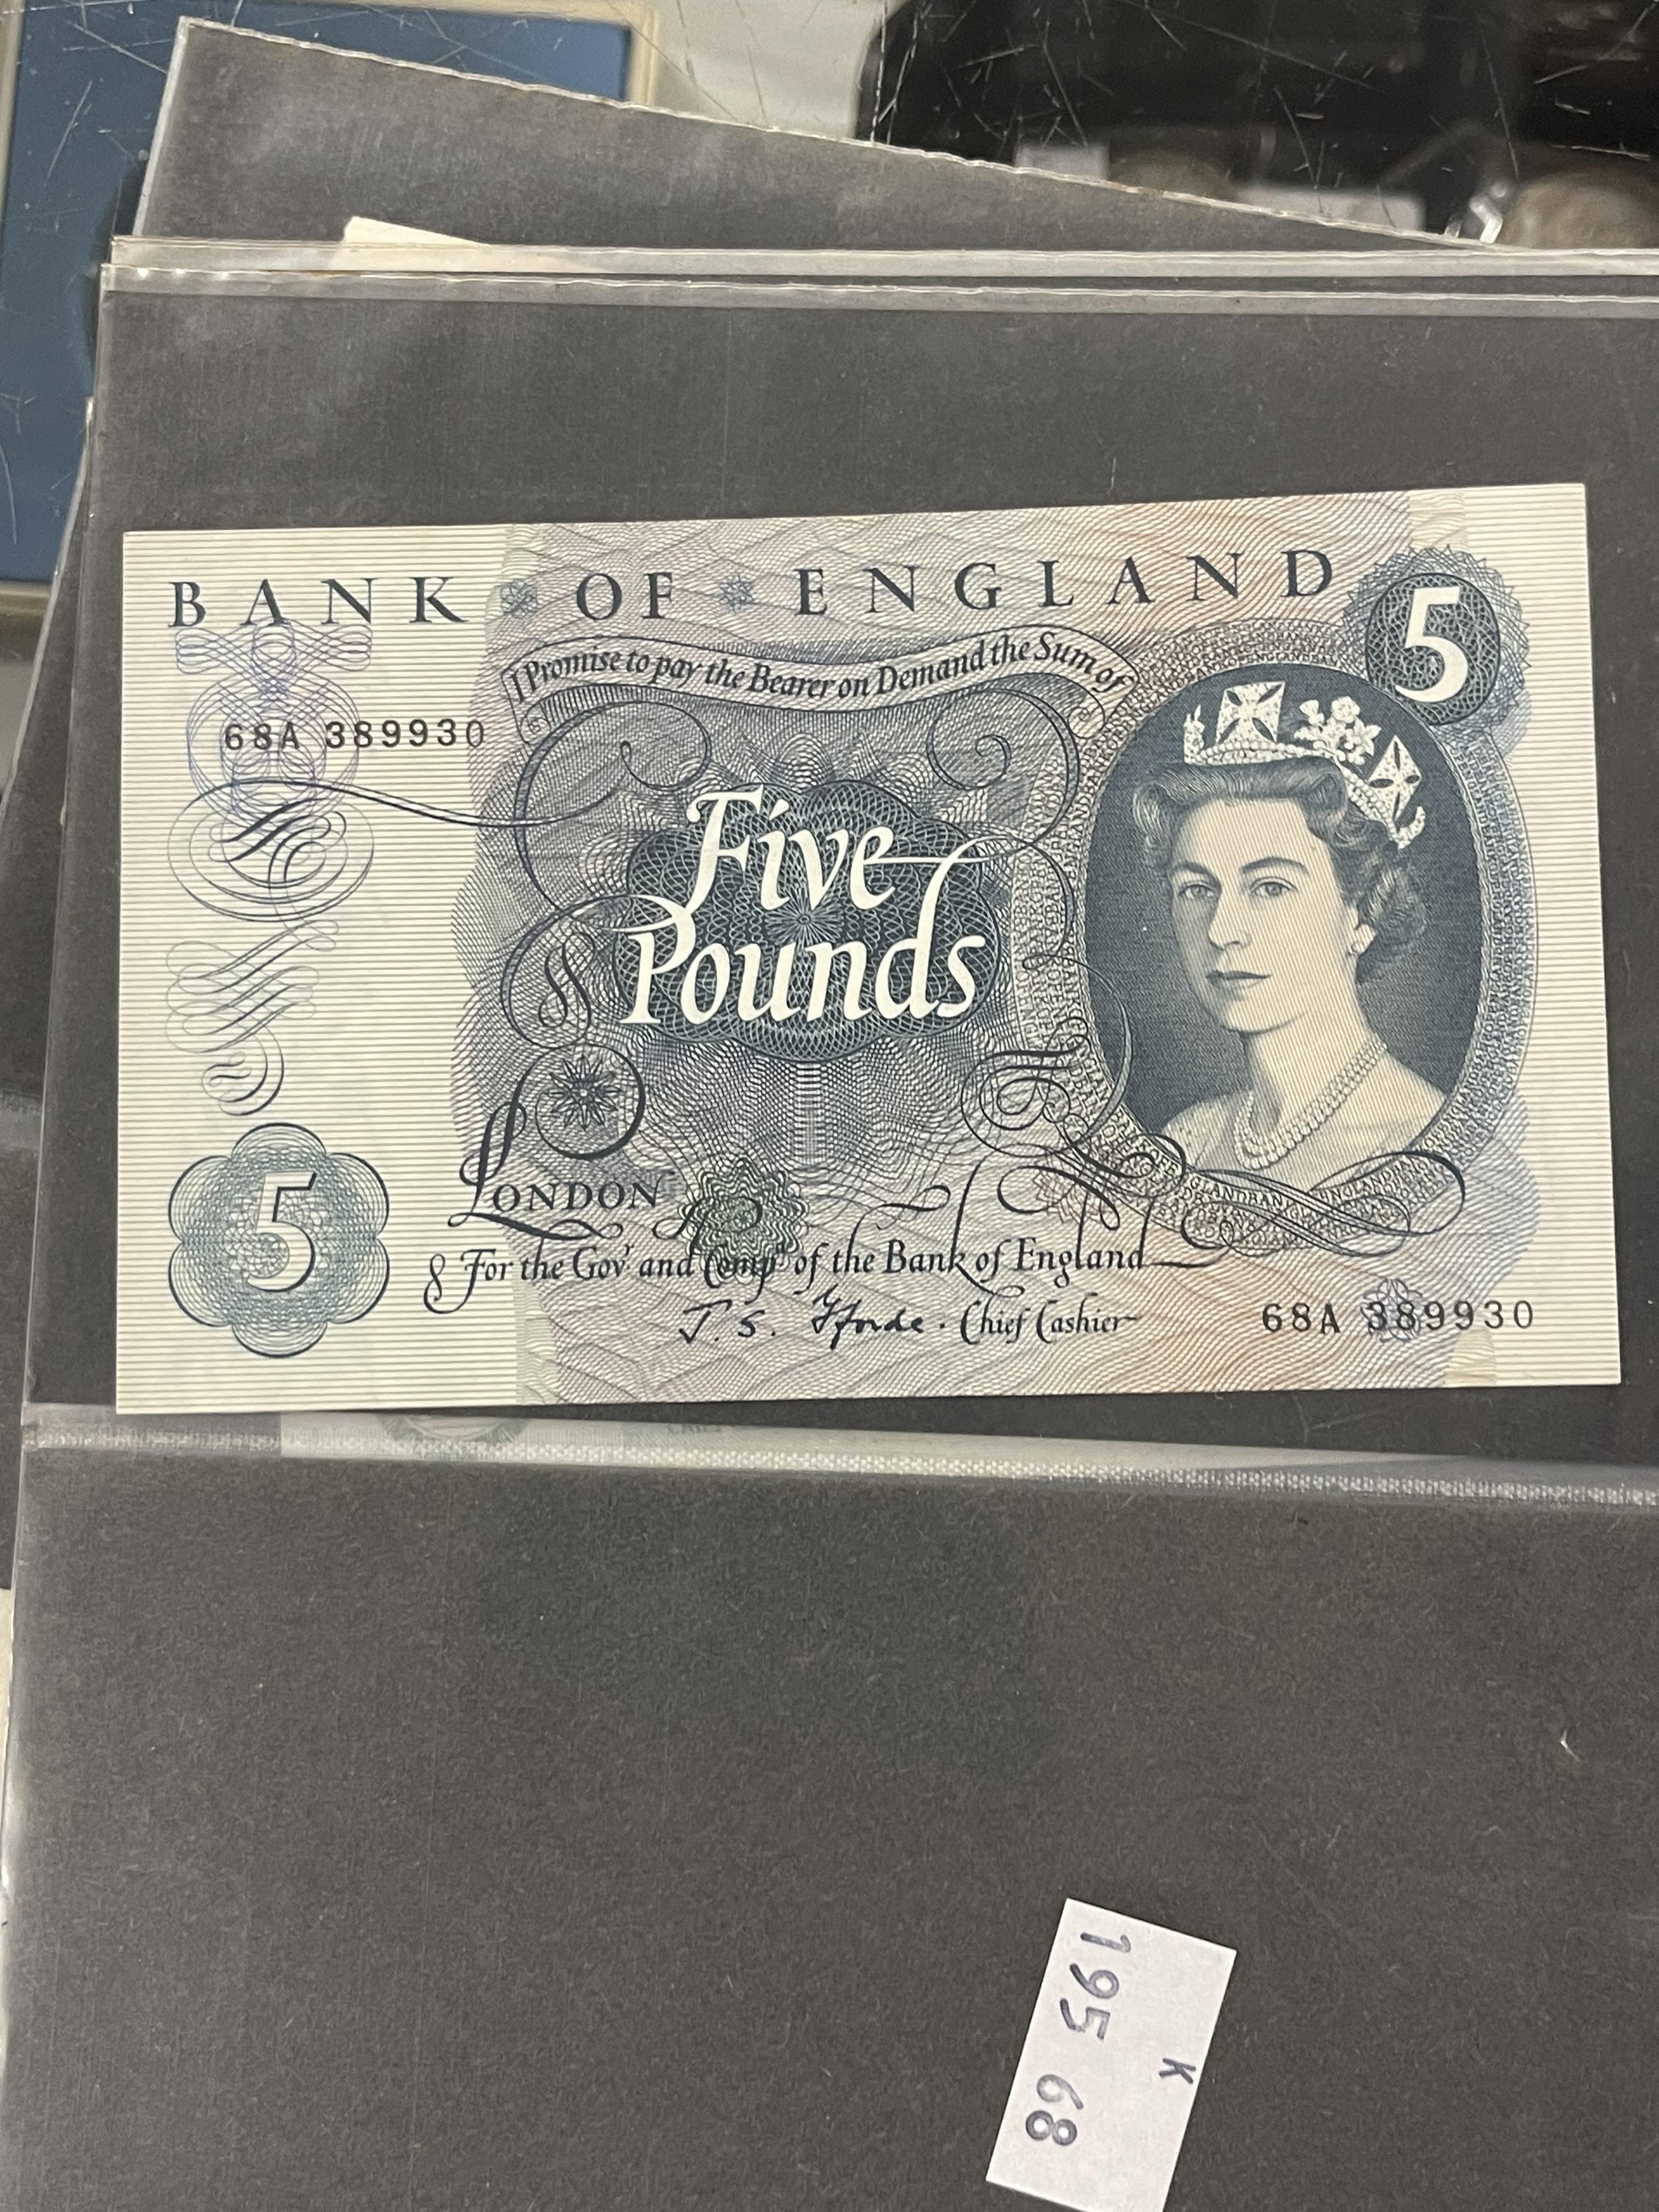 Numismatics: GB banknotes four circulated Fforde 1d notes, five Page uncirculated Isaac Newton £1 - Image 4 of 4